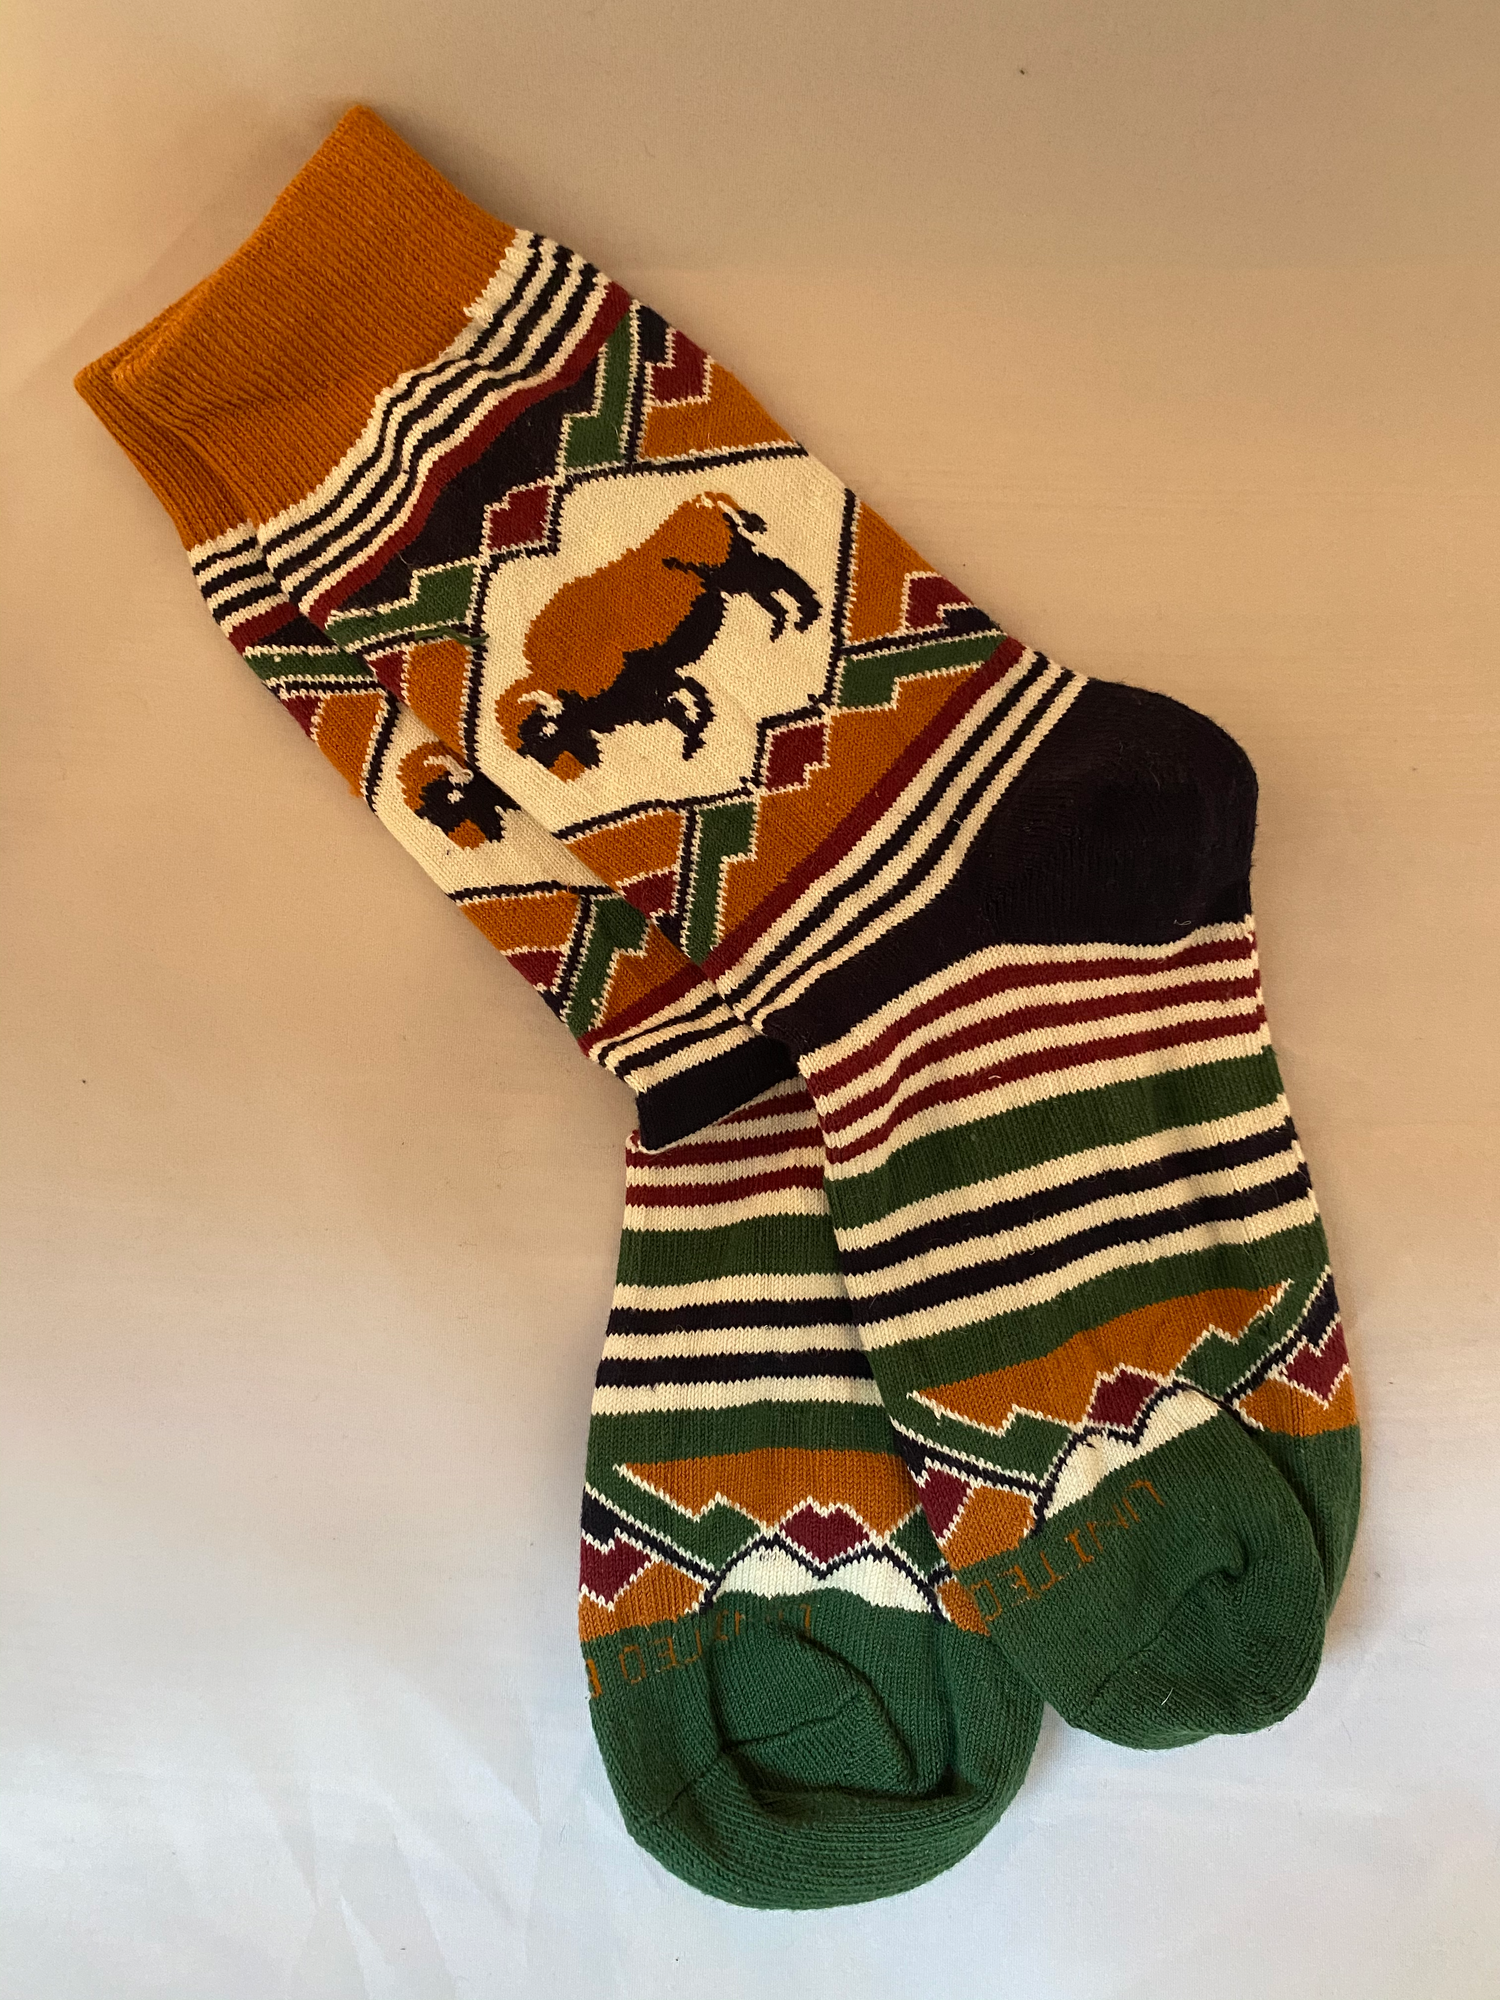 Bison socks by United by Blue